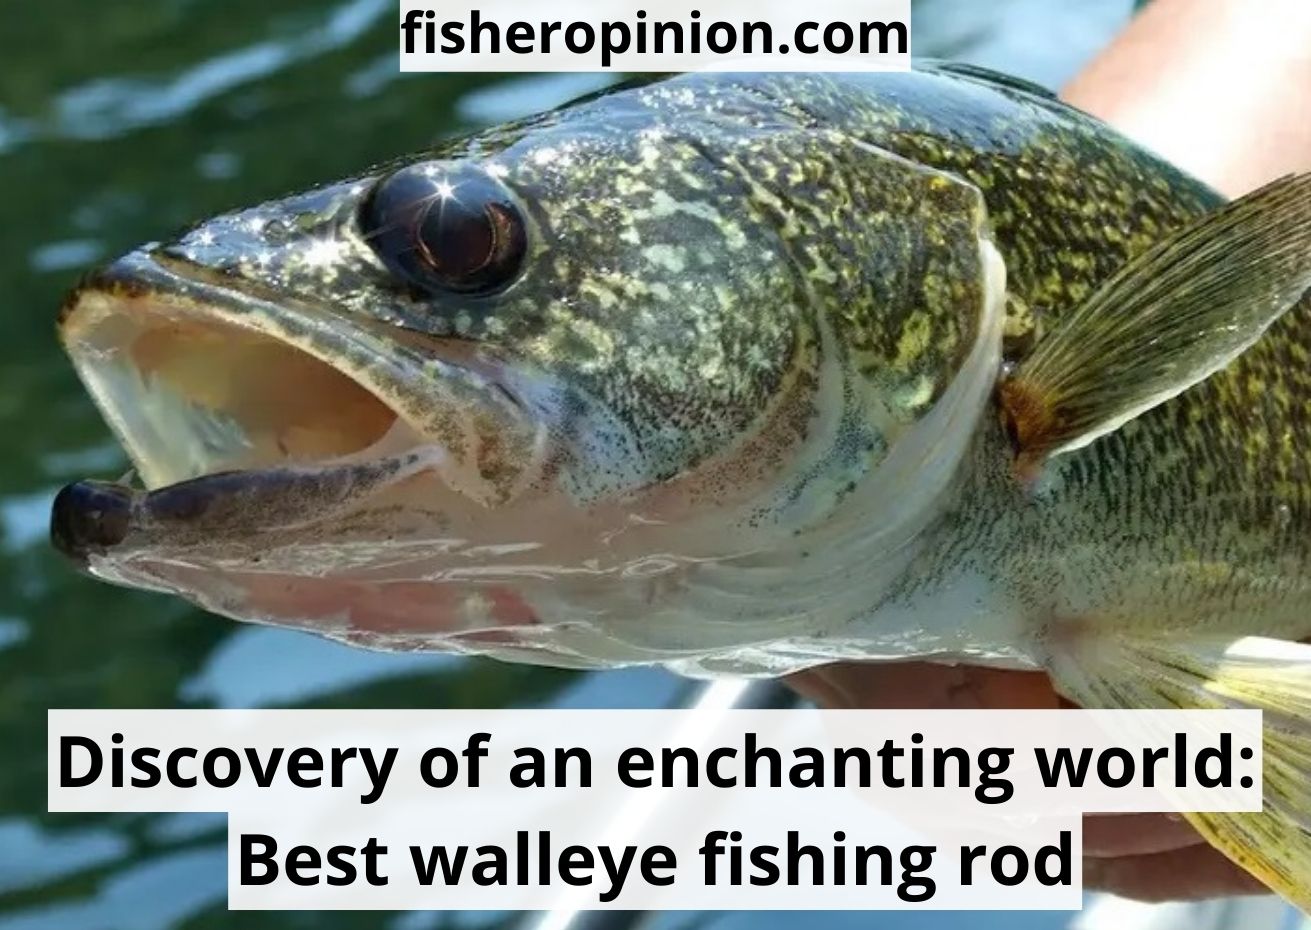 Best walleye fishing rod: choose from the 6 examples